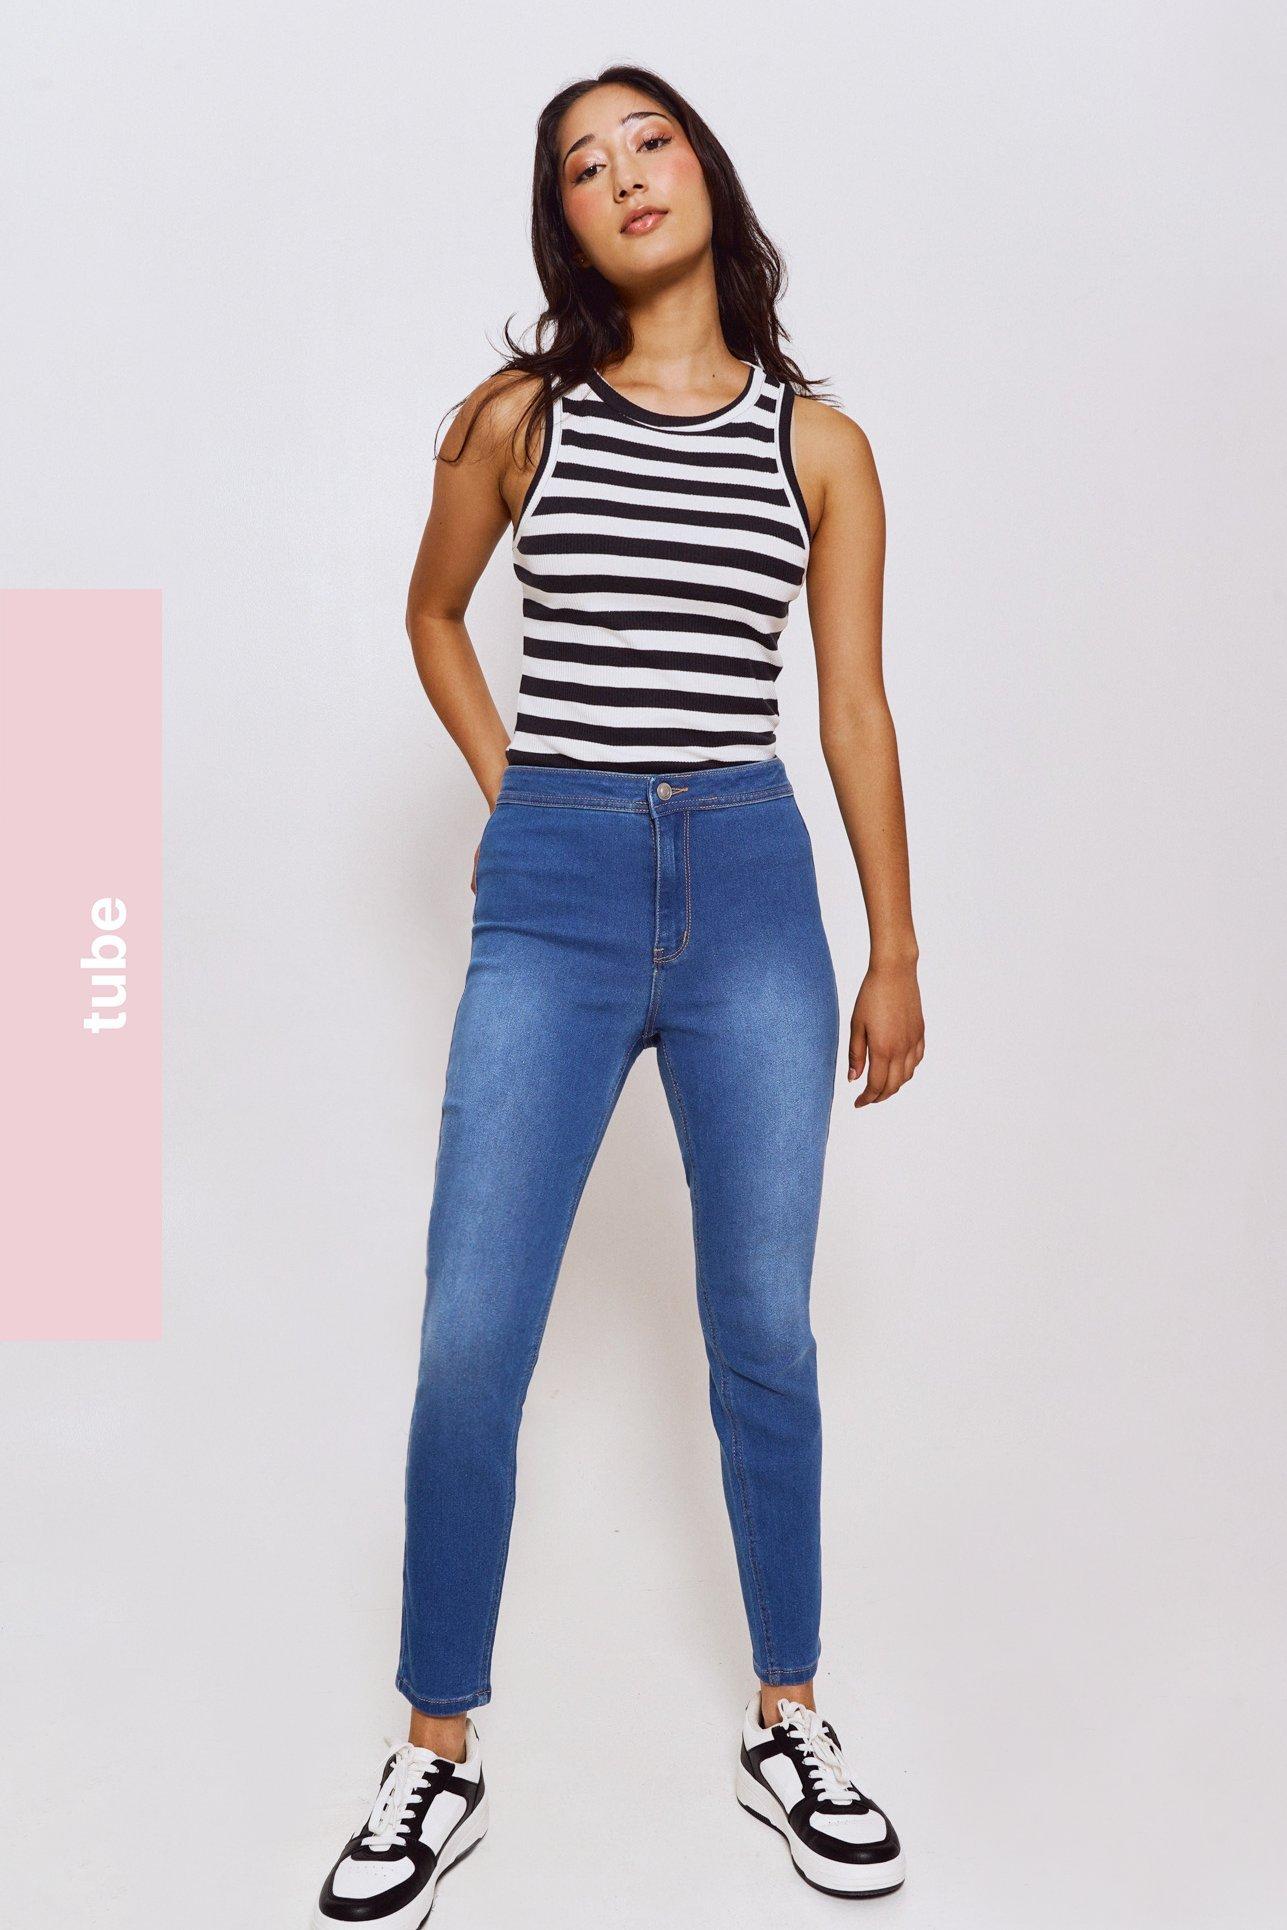 Mr Price Ladies Denim jeans, Skinny jeans, high-rise, tube, balloon, mommy  jeans